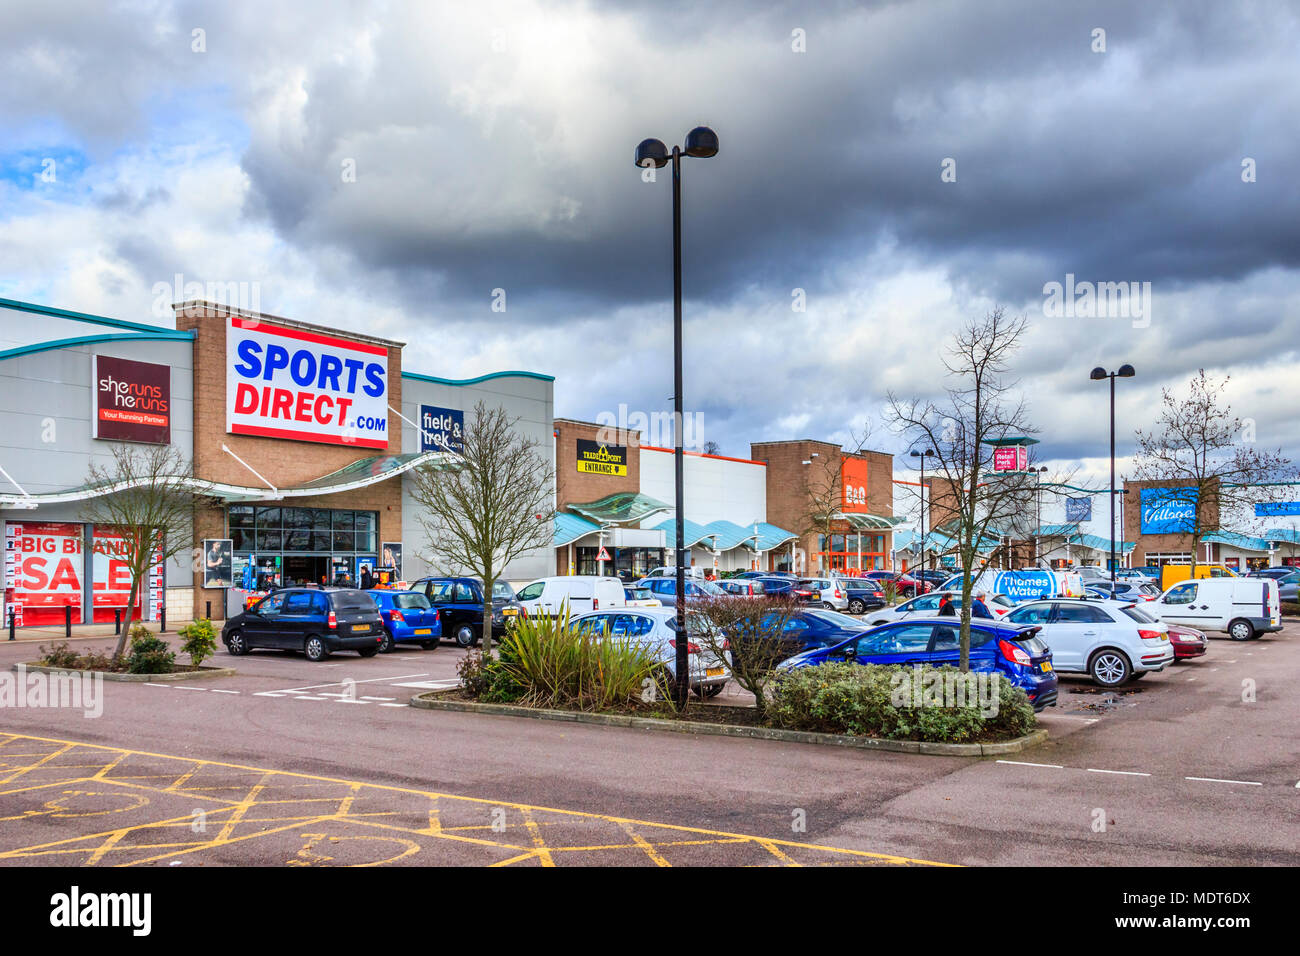 Clouds gather over the Sports Direct store at Friern Bridge retail park, next to the North Circular Road near Friern Barnet in North London, UK Stock Photo